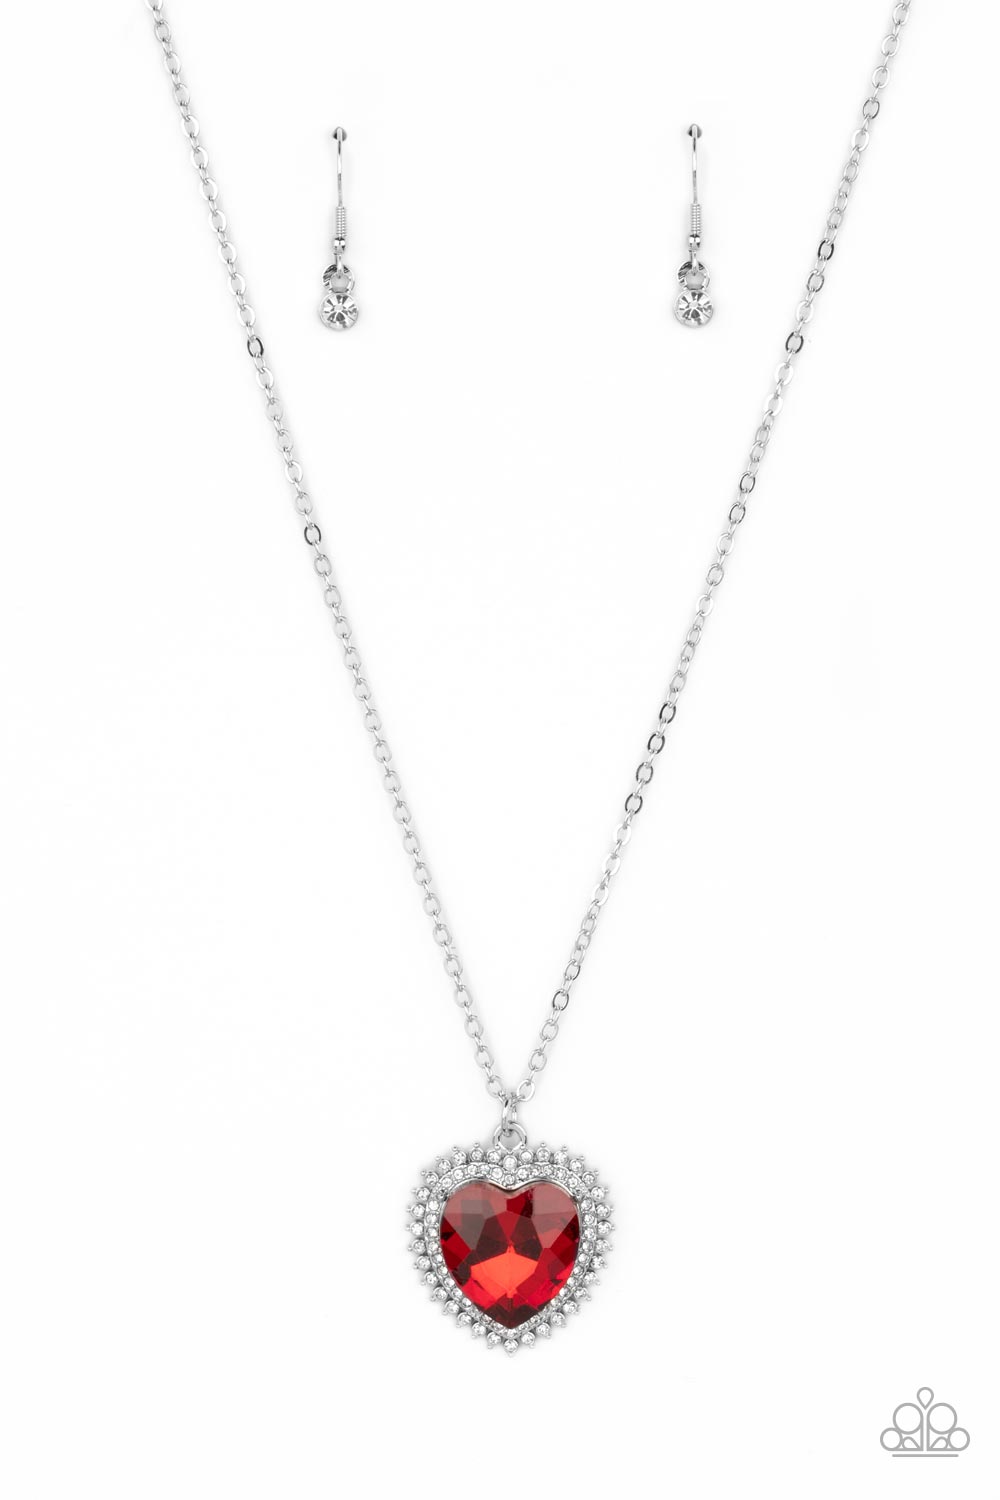 Sweethearts Stroll - Red Heart Gem White Rhinestones Silver Short Necklace